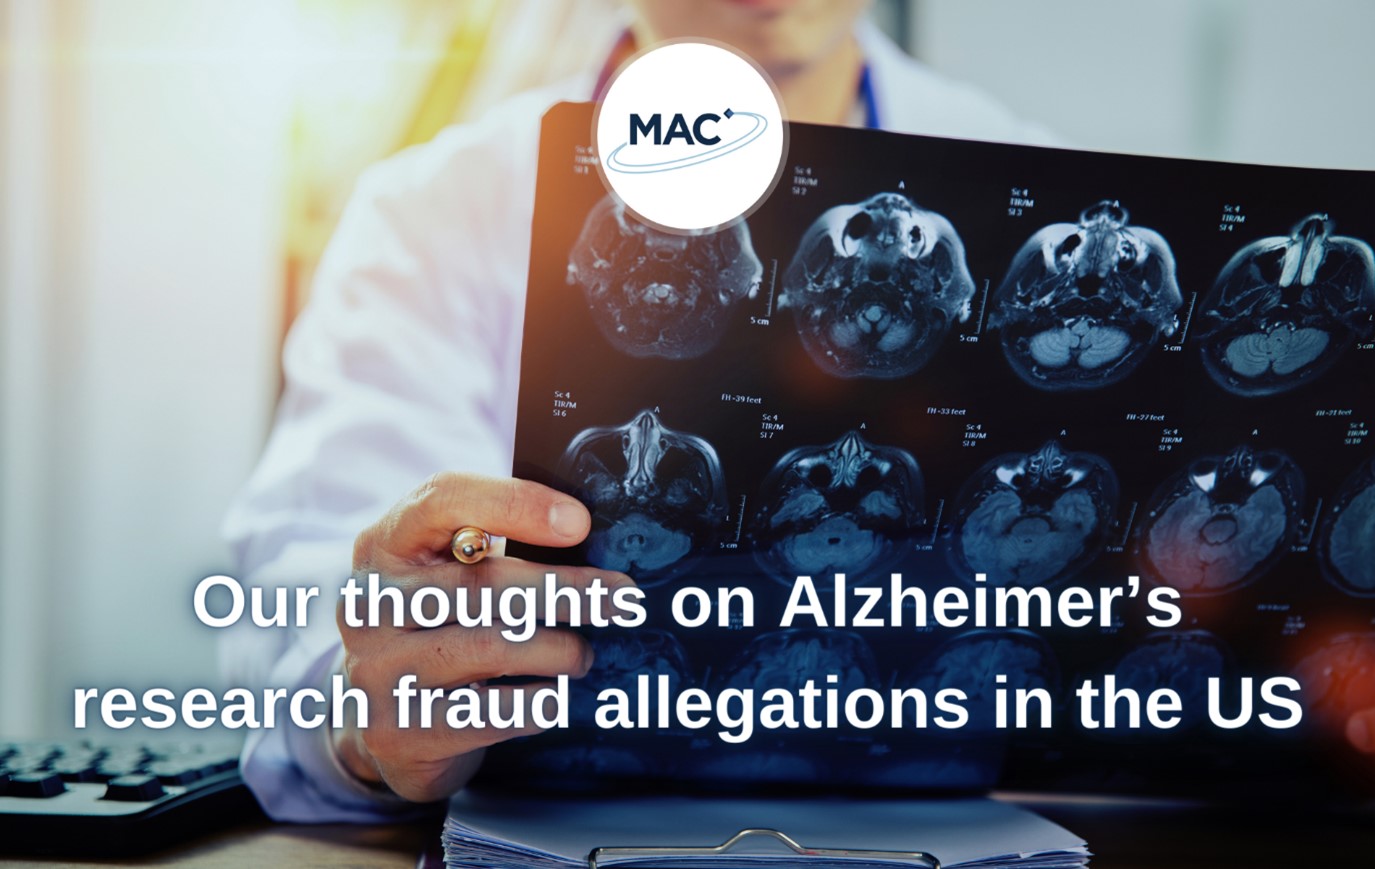 Our thoughts on Alzheimer’s research fraud allegations in the US